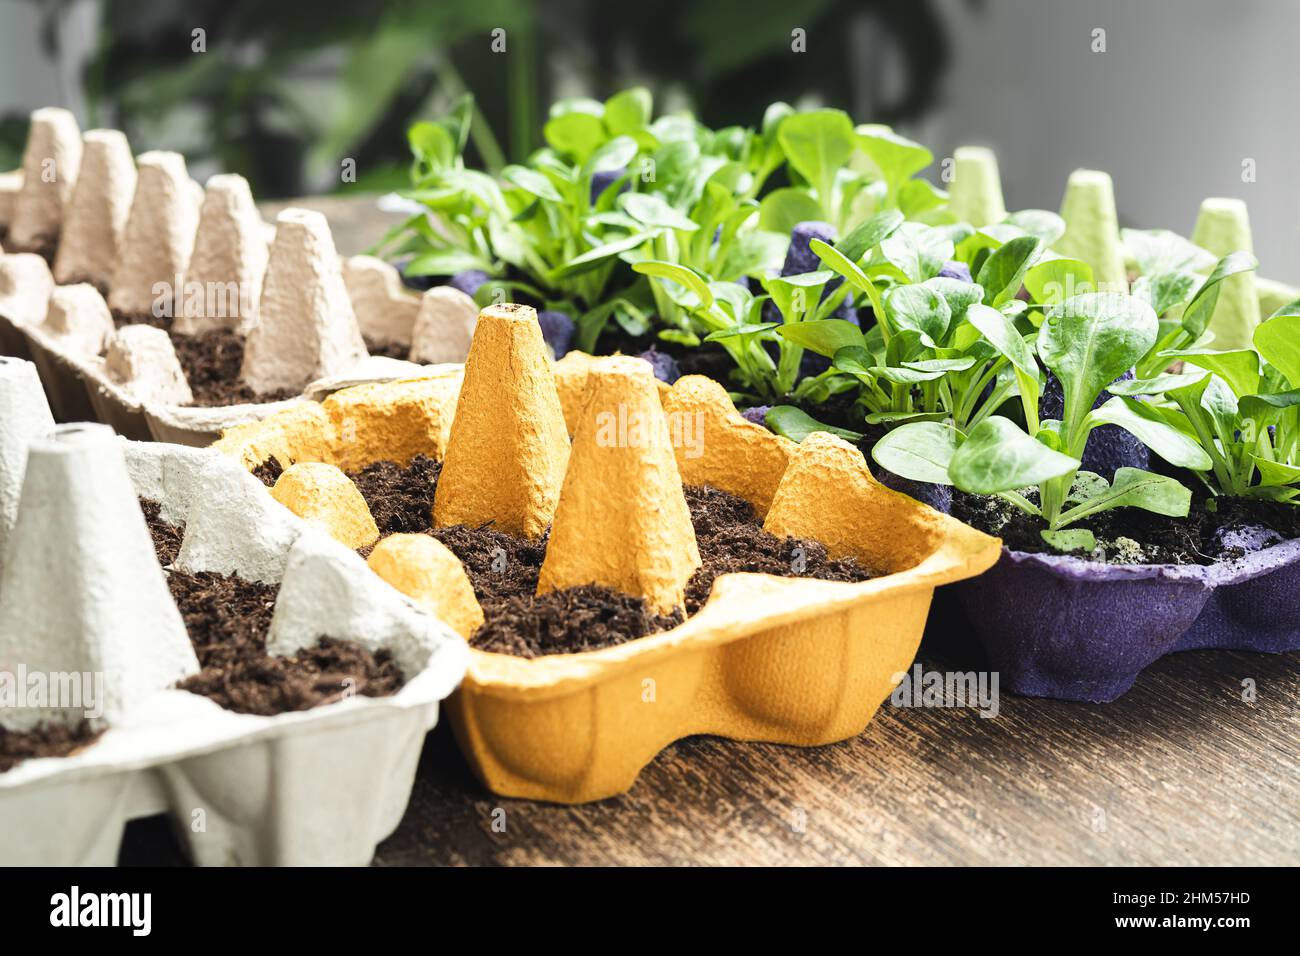 Sprouts in multi-colored reused egg cartons, sustainable environmental gardening and connecting with nature concept Stock Photo